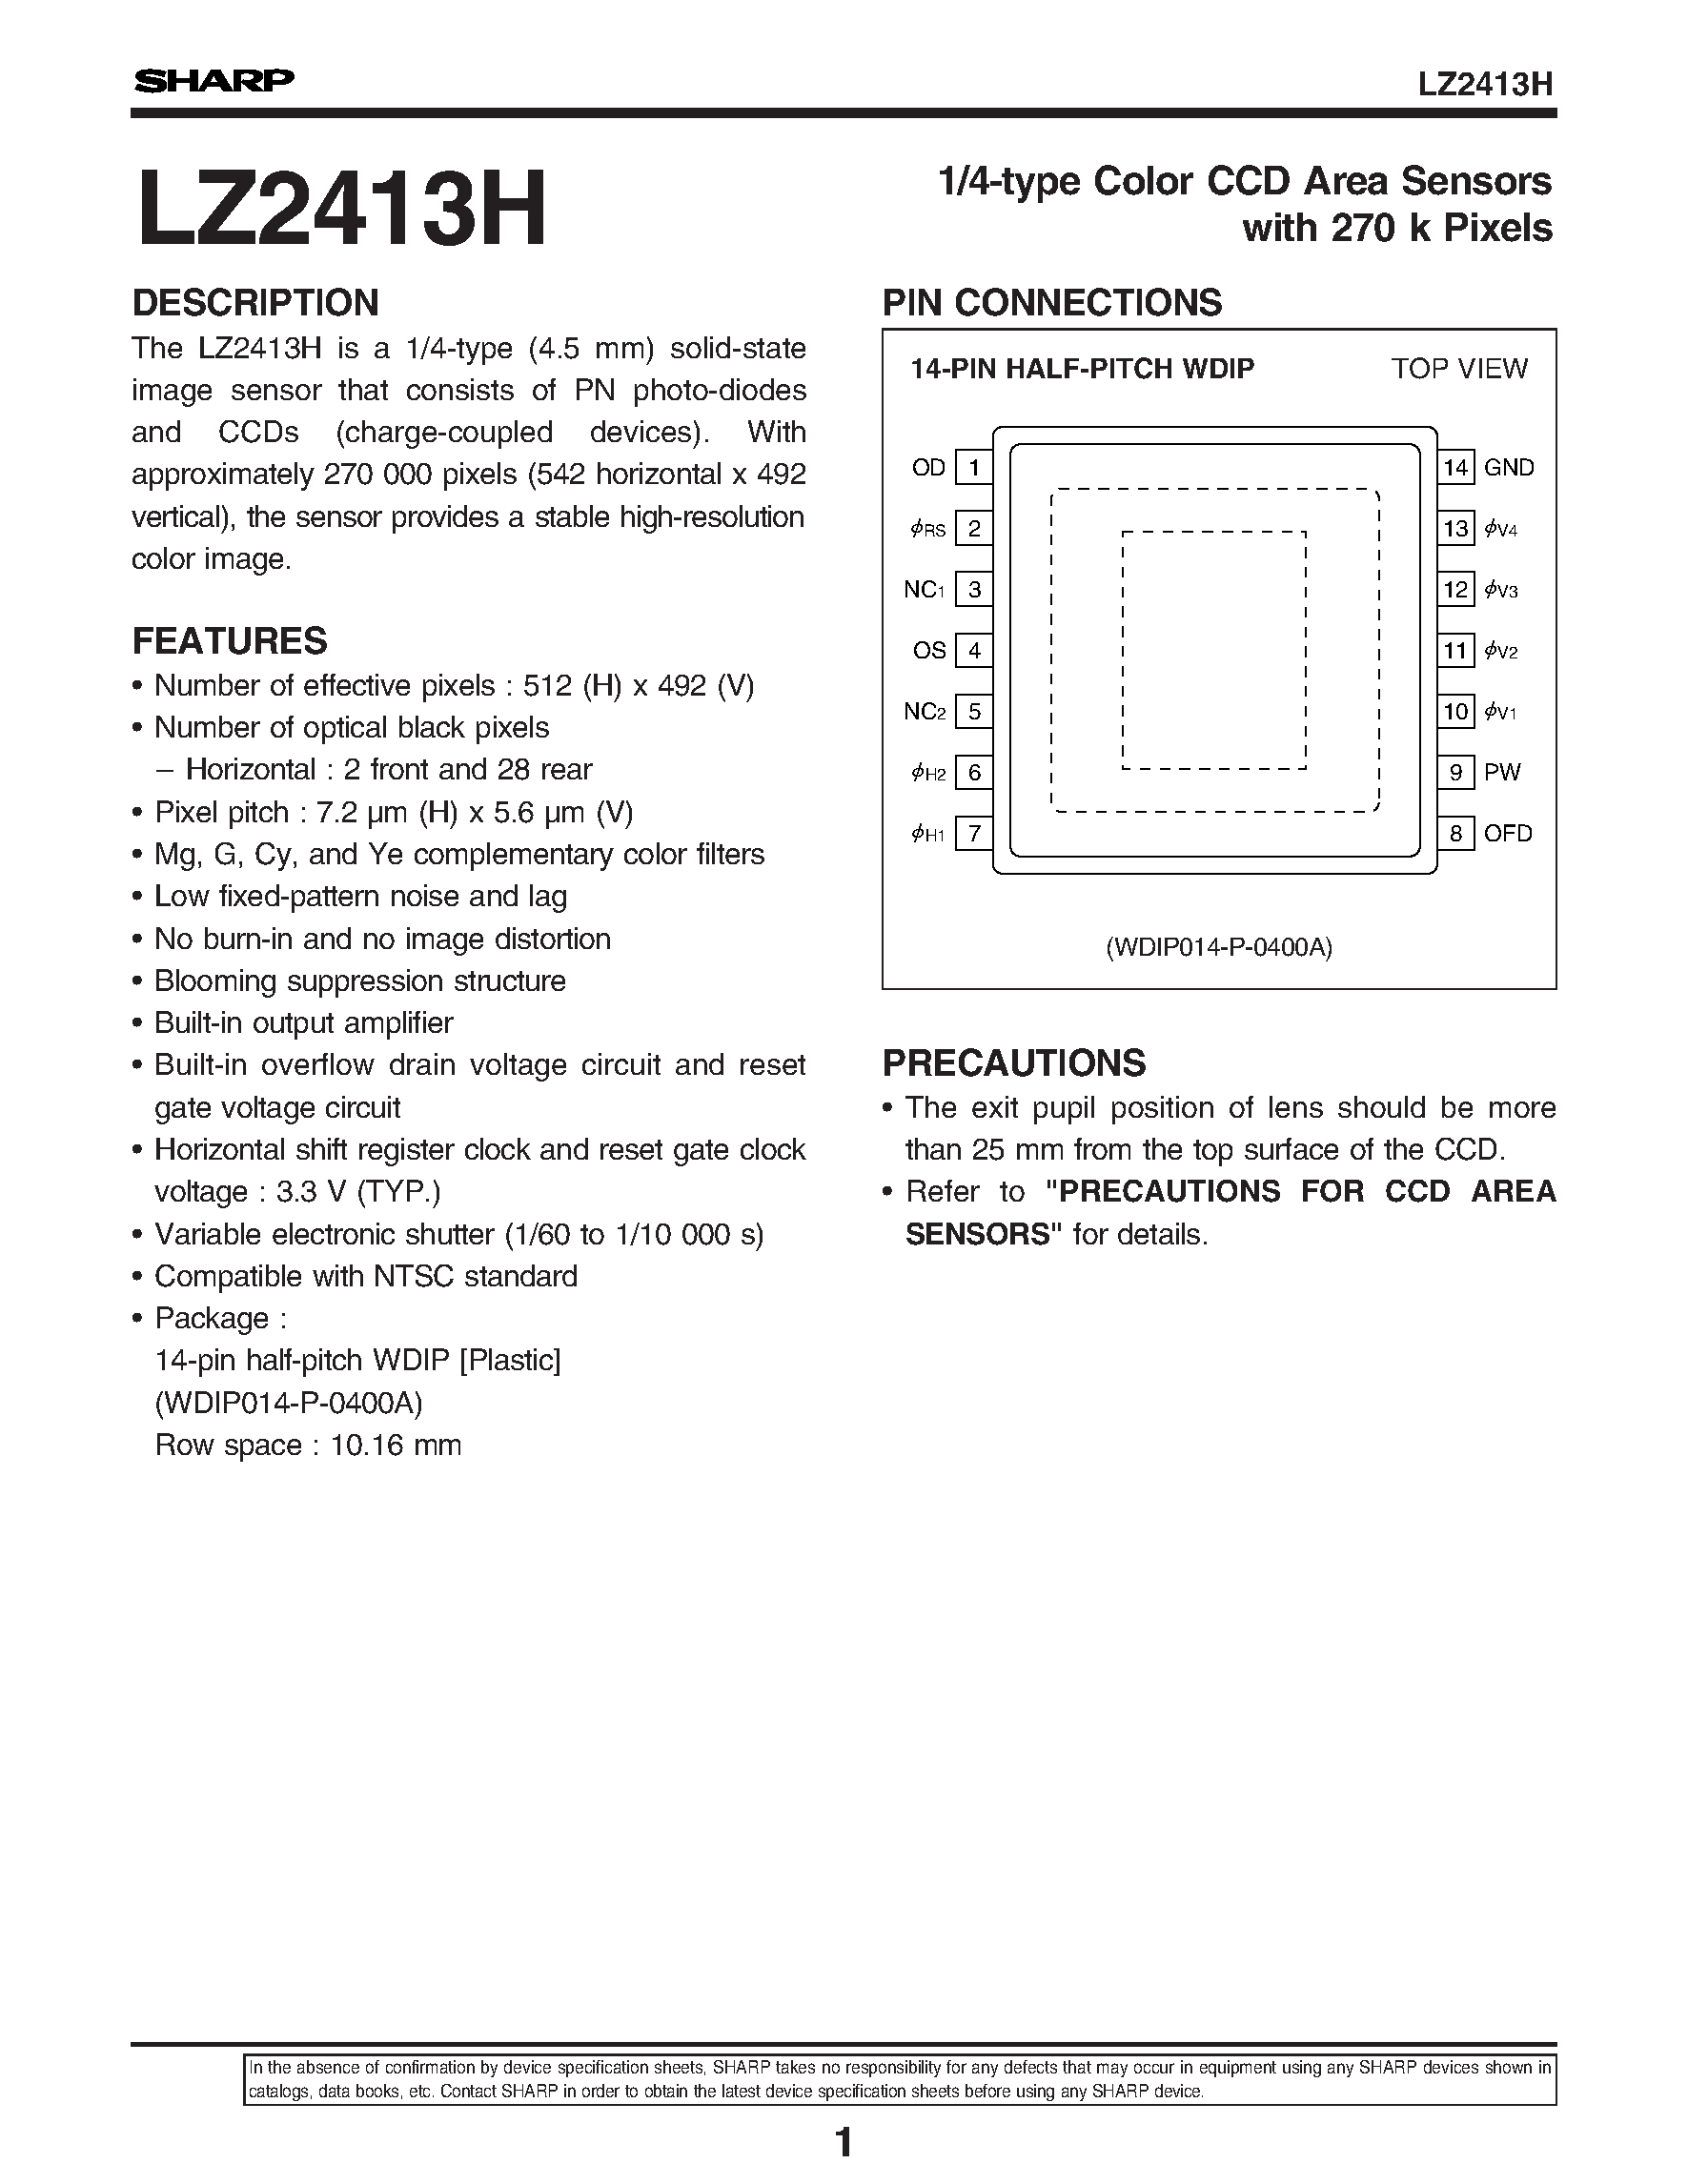 Datasheet LZ2413H - 1/4-type Color CCD Area Sensors with 270 k Pixels page 1